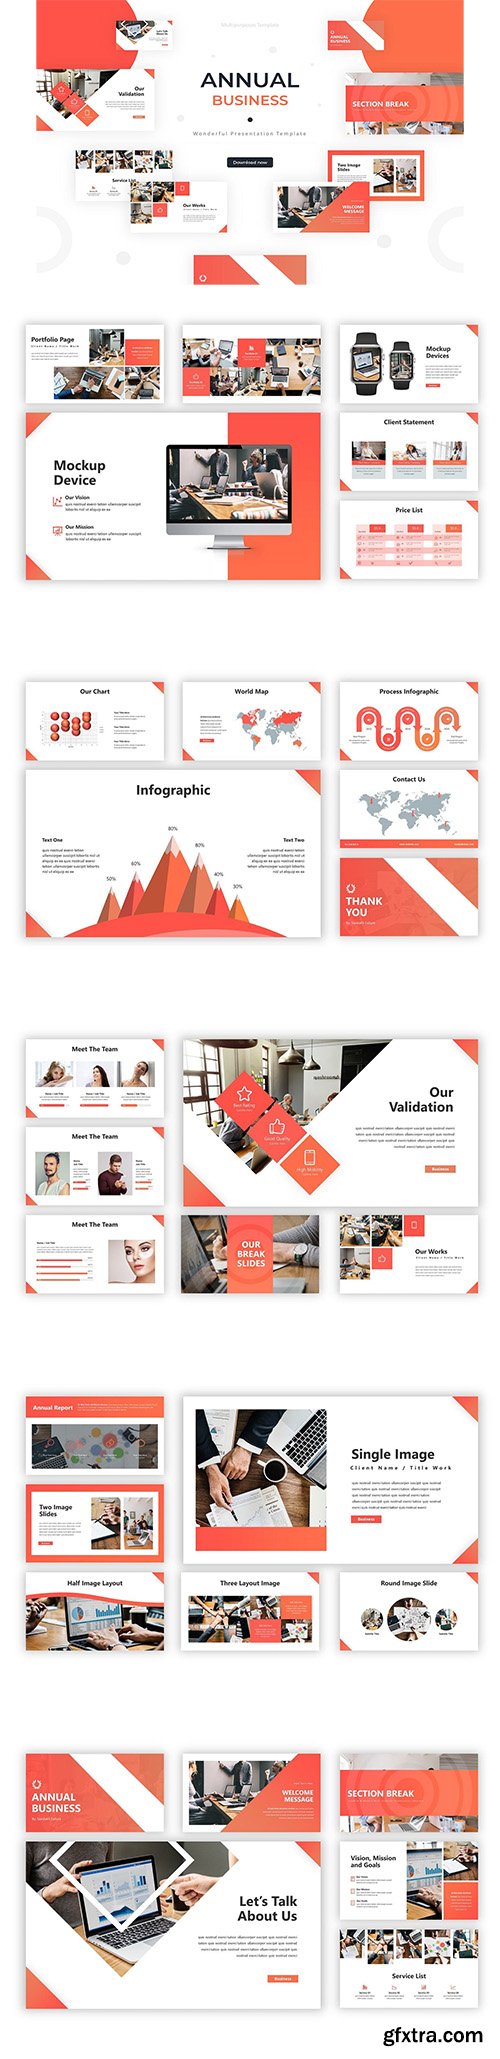 Annual Business - Powerpoint Template